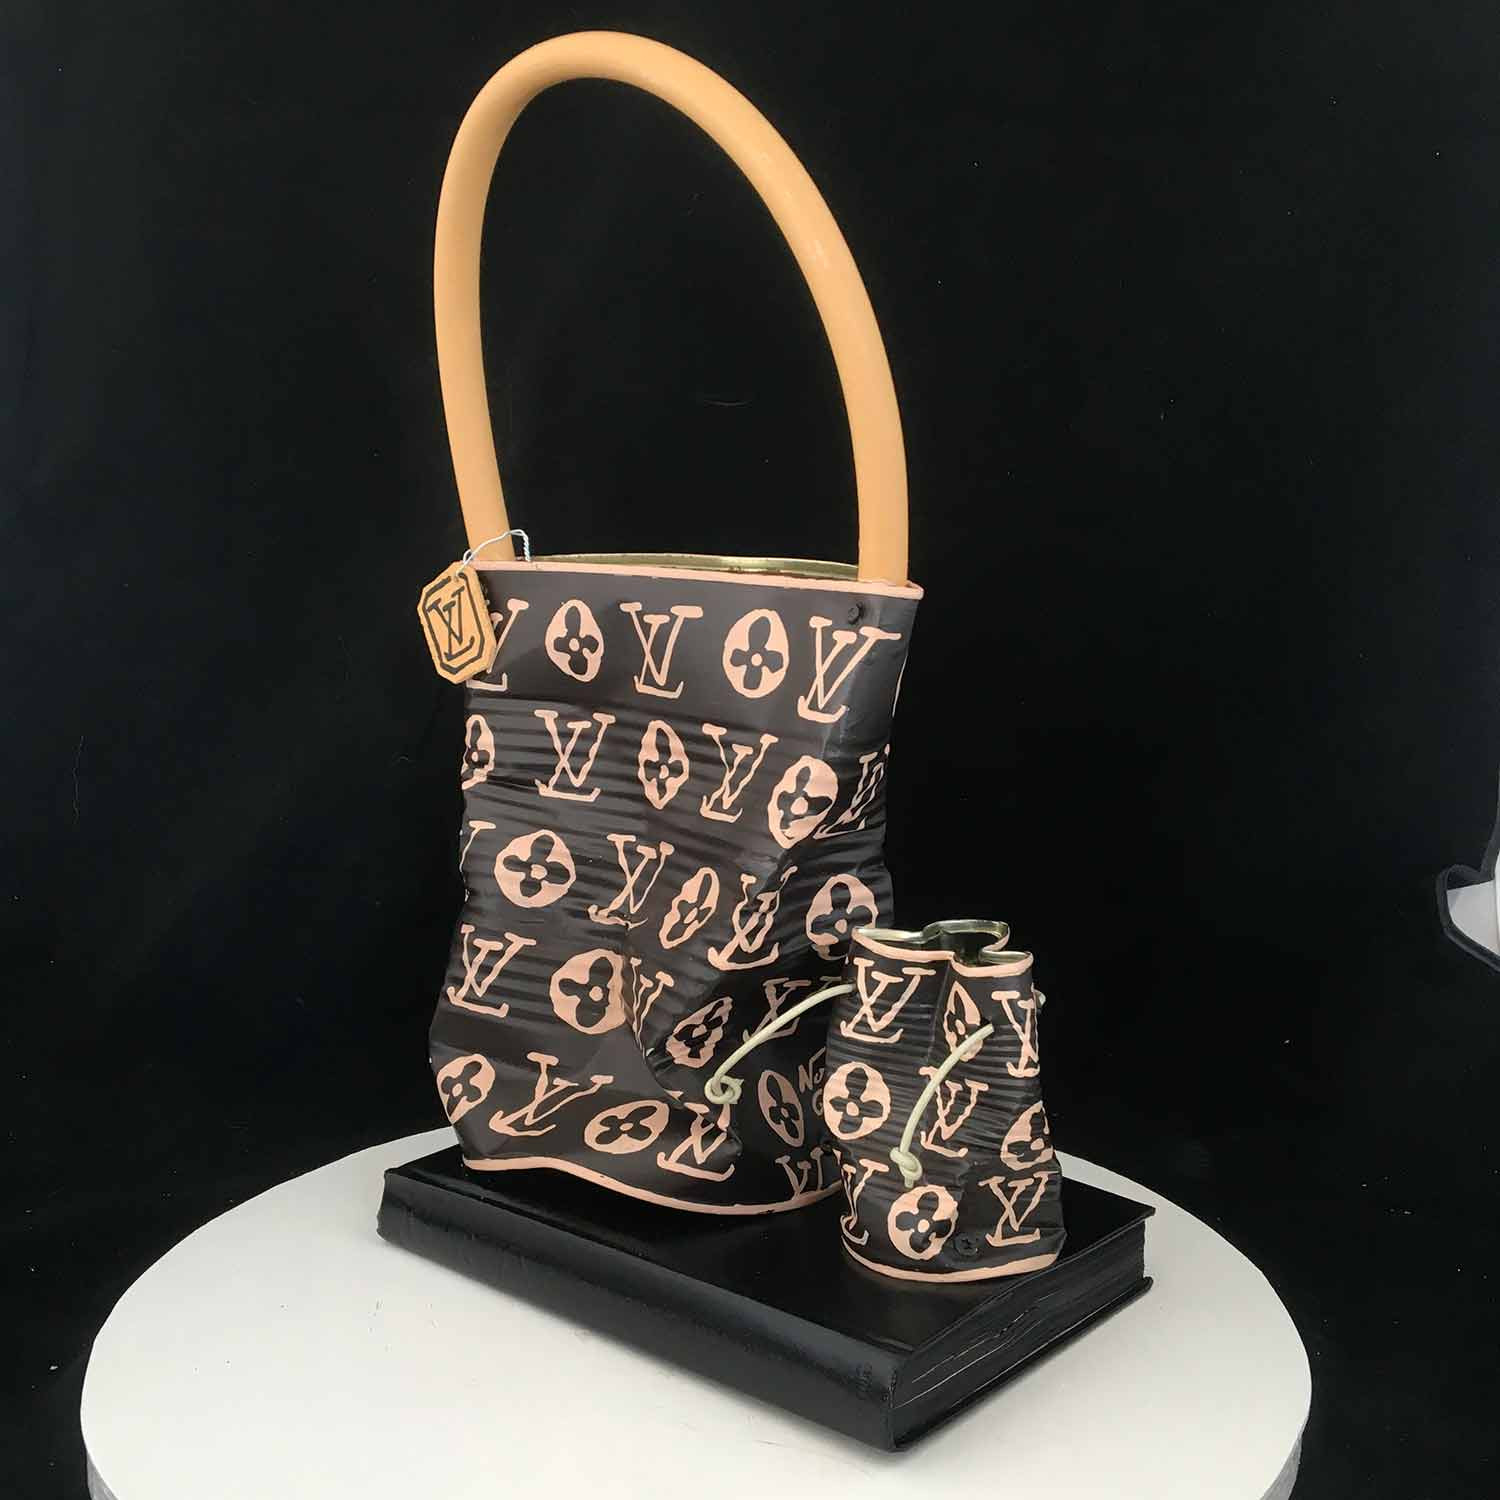 Contemporary Art - Mixed media - Crushed Vuitton and Baby Vuitton